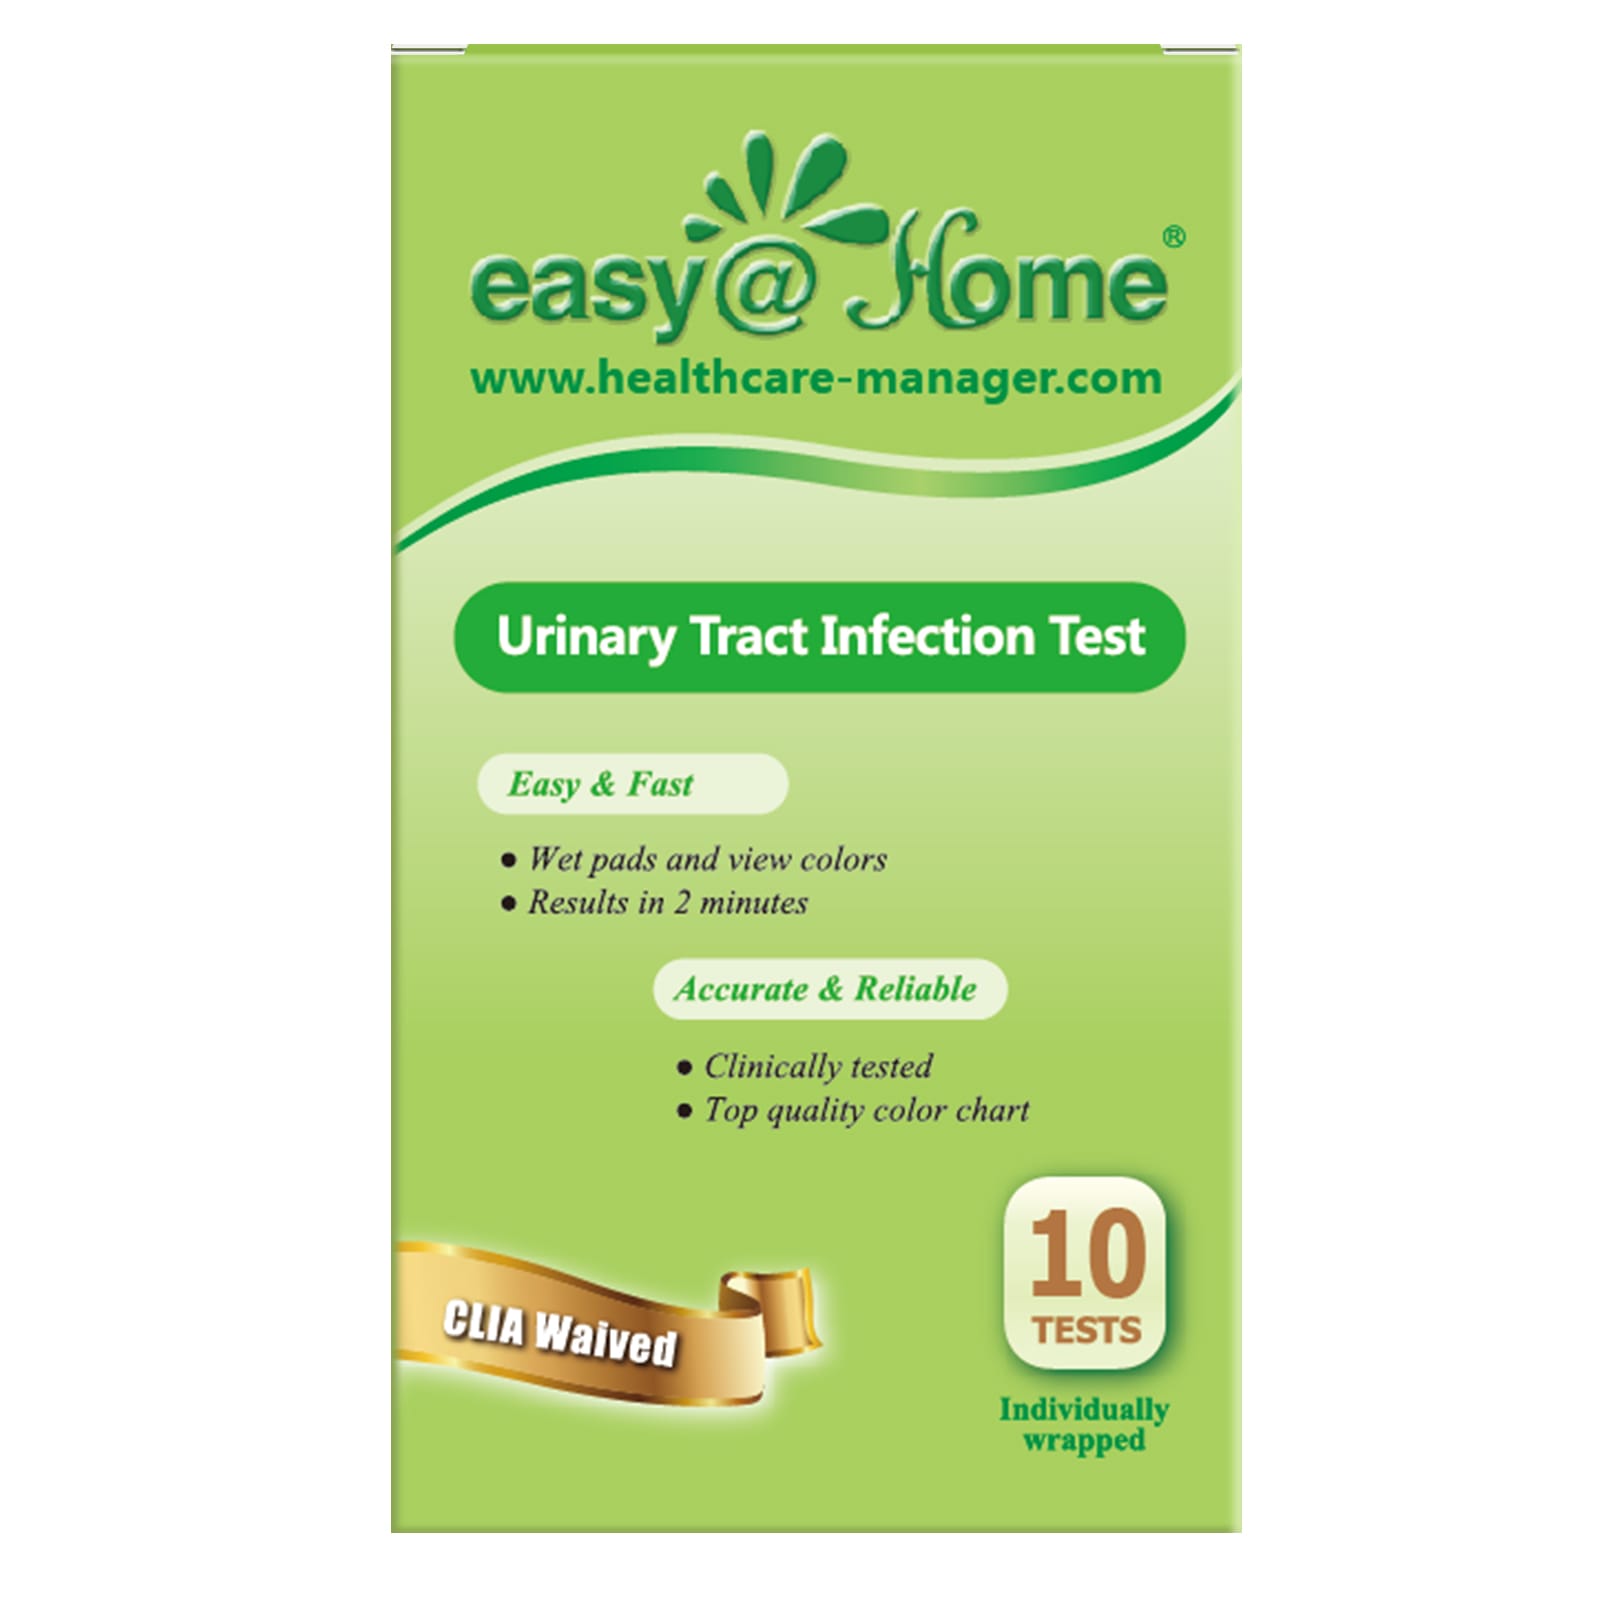 Easyhome Urinary Tract Infection Test 10 Individually Wrapped Tests 9279